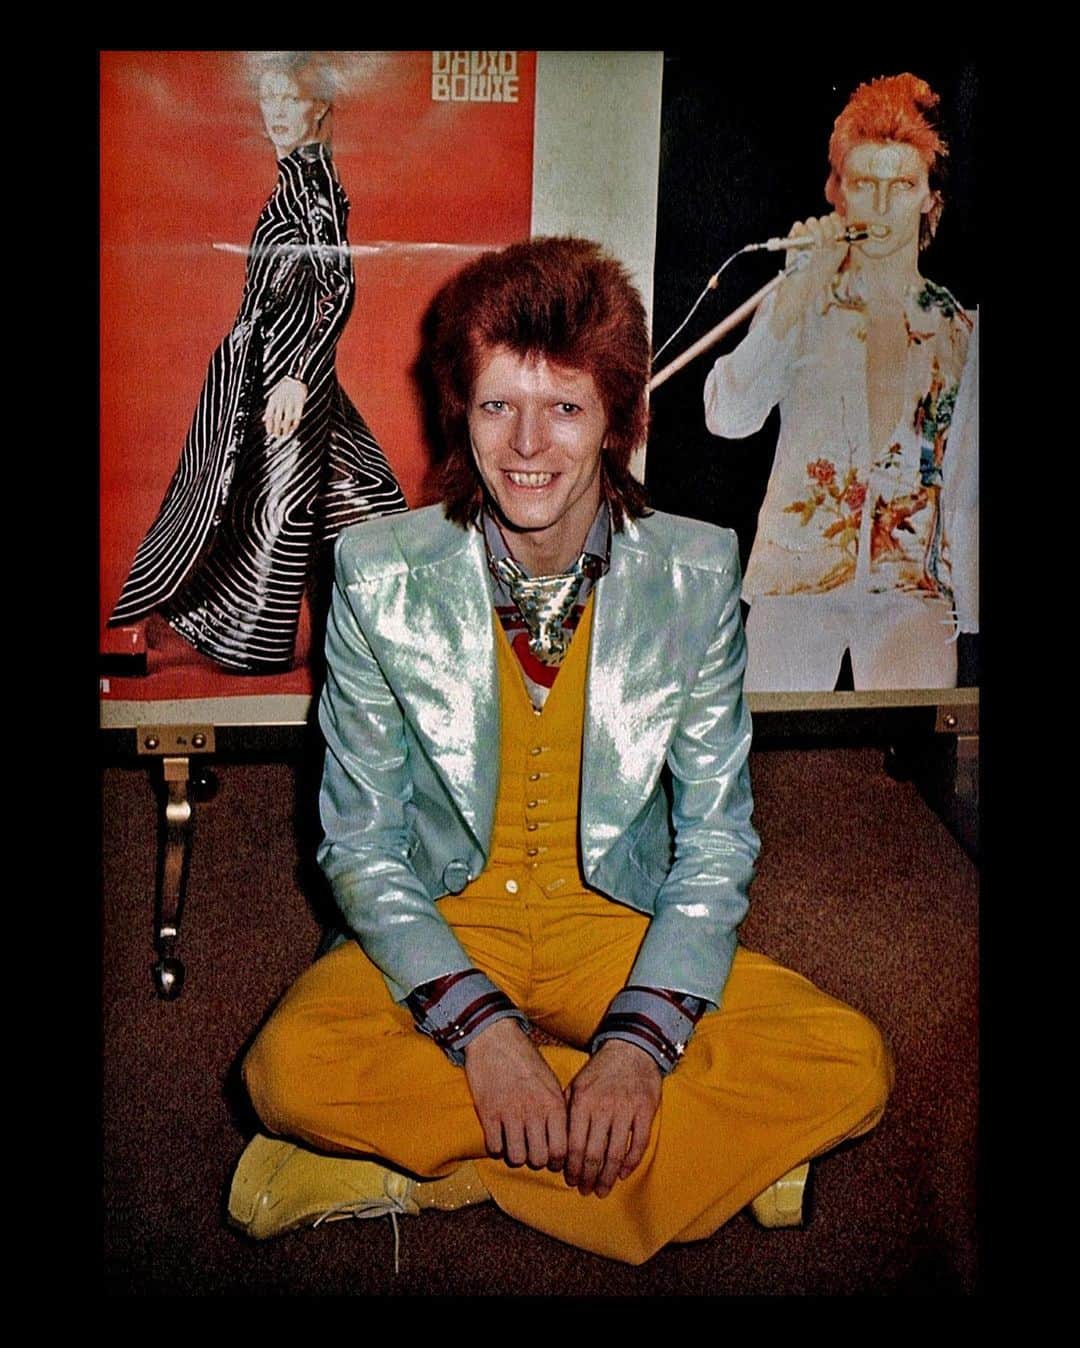 デヴィッド・ボウイさんのインスタグラム写真 - (デヴィッド・ボウイInstagram)「DAILY BOWIE THING – Day 79  “Sake and strange divine…”  On Thursday 5th April 1973, David Bowie and travelling companion, Geoff MacCormack, docked at Yokohama in Japan aboard the SS Oronsay. Slide #1 in our slideshow was taken during a press conference at Imperial Hotel, Tokyo, the following day, as were slides #4 & #10, © Koh Hasebe / Shinko Music Archive.  To coincide with David’s 8-date mini tour of Japan (his first in Japan), RCA issued two promotional albums in the shape of the compilation ROCK 'N' ROLL NOW and Aladdin Sane. They are pictured on slide #2 along with a flier for the Tokyo shows and a press advert.   Brian Ward’s 1972 Ziggy 'Droog' picture was prominent on the albums and in the associated advertising, along with his Ziggy 'hi-kick' photograph which had graced the front of RCA’s 1972 re-issue of The Man Who Sold The World.  Japanese journalists were given a beautiful press kit housed in the paper envelope pictured on slide #3. The kit contained folded versions of the two colour posters (behind David in slide #4), featuring shots taken by Masayoshi Sukita. The two black & white 10x8 promo photos on slide #5 utilising the same shots were also in the press kit.   The live shot from the tour on slide #6 features in Bowie and Sukita’s incredible Speed Of Life book, issued by Genesis Publications in 2012, as does the photo taken in February 1973, at RCA Studios in New York, on slide #7. One of the colour posters also featured a shot from this session.   Slide #8 is the cover of an A4, 28-page, promo booklet included in the press kit. We’re not sure if this was available commercially on the tour too, though there was also a lavish official Japanese colour tour programme. Anybody out there know?   The single-sided leaflet on slide #9 was contained in the kit as were several pages of tour itineraries and other information.   As you've no doubt guessed, this press kit is very rare and just never shows up these days, though the booklet on slide #8 does turn up every now and again.  #DailyBowieThing  #BowiePressKit  #BowiePromoPhotos  #BowieJapan」1月25日 10時04分 - davidbowie